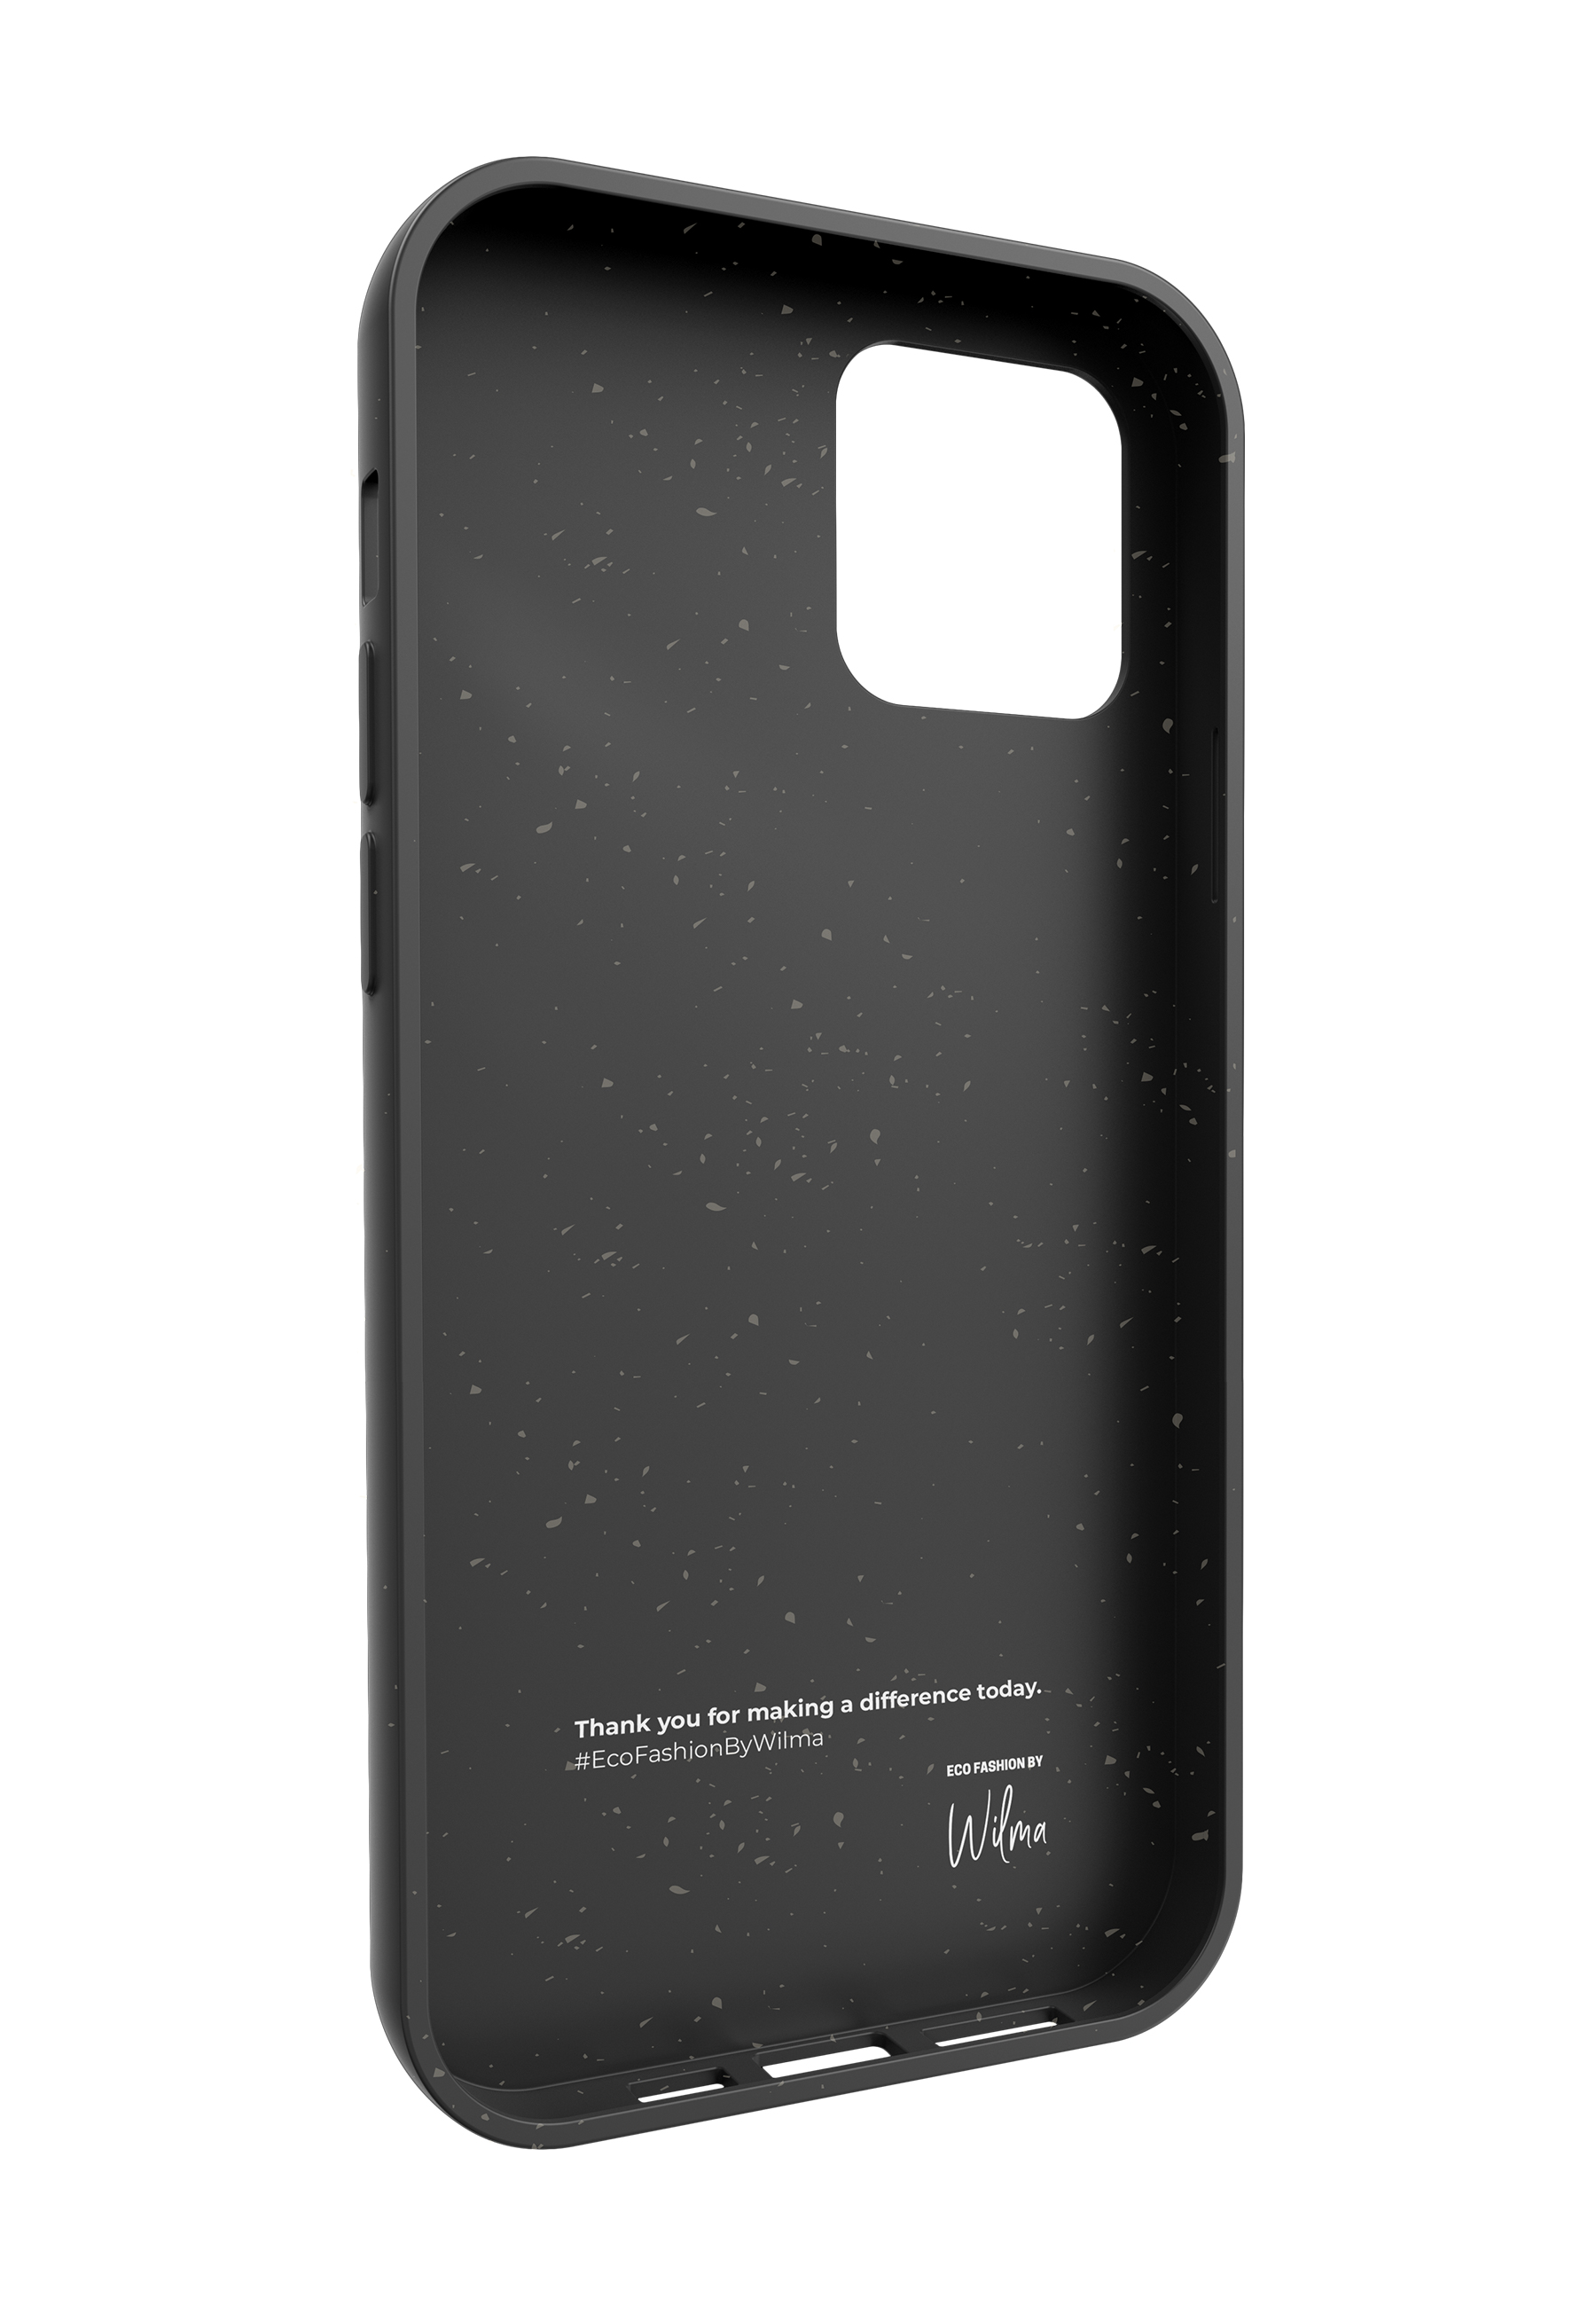 ECO FASHION BY WILMA P12PM, 12 Pro black Apple, Max, Backcover, iPhone